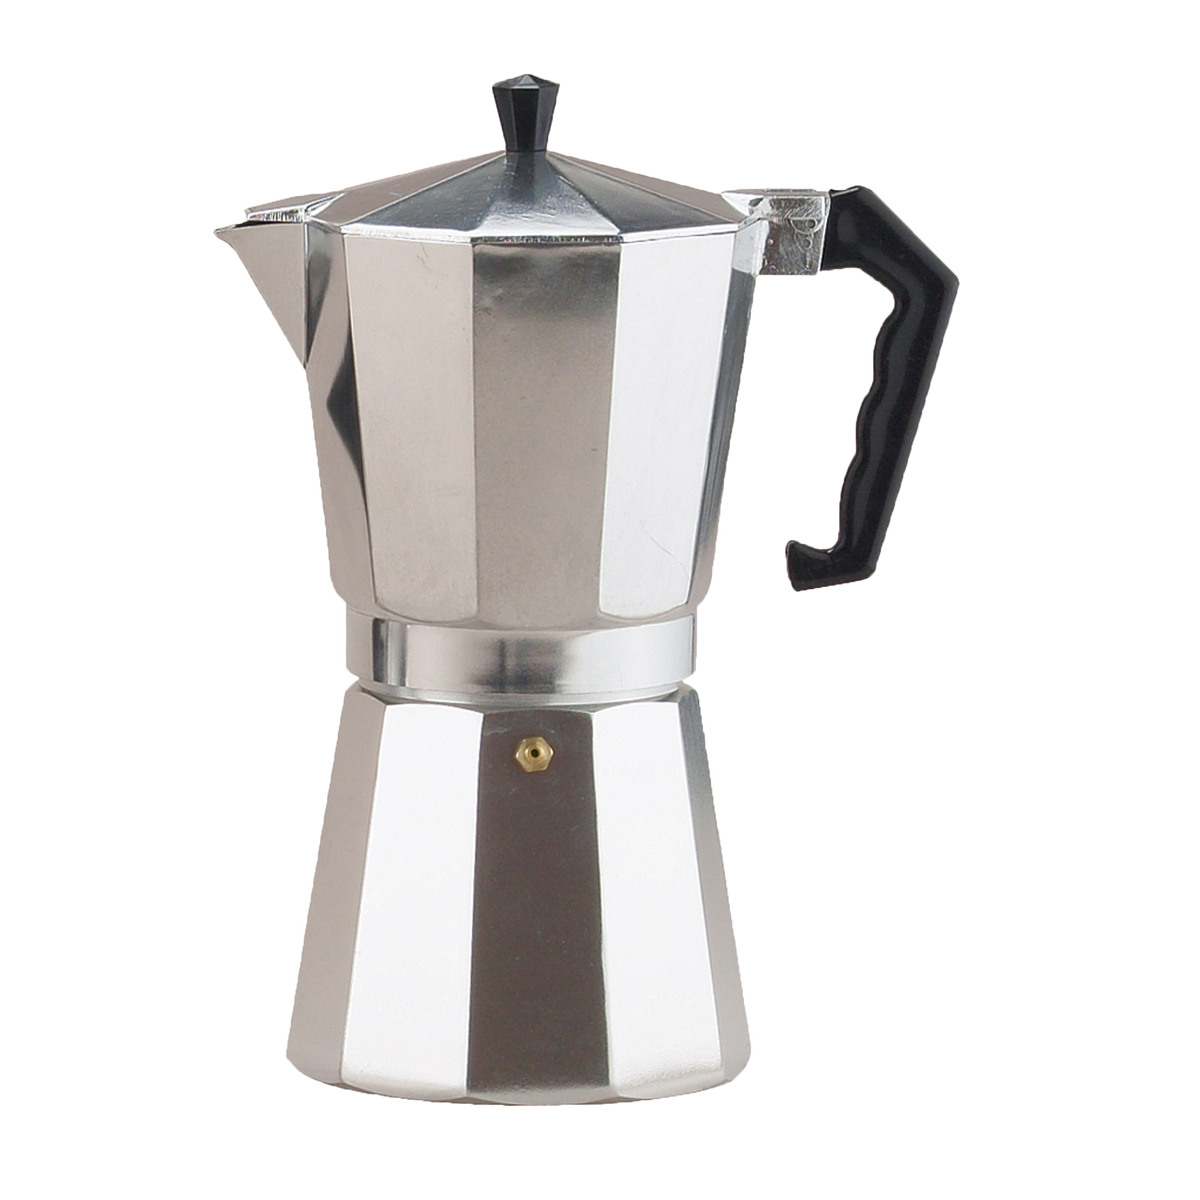 Aluminum Stovetop Espresso Maker, 6 Cup - Primula Stainless